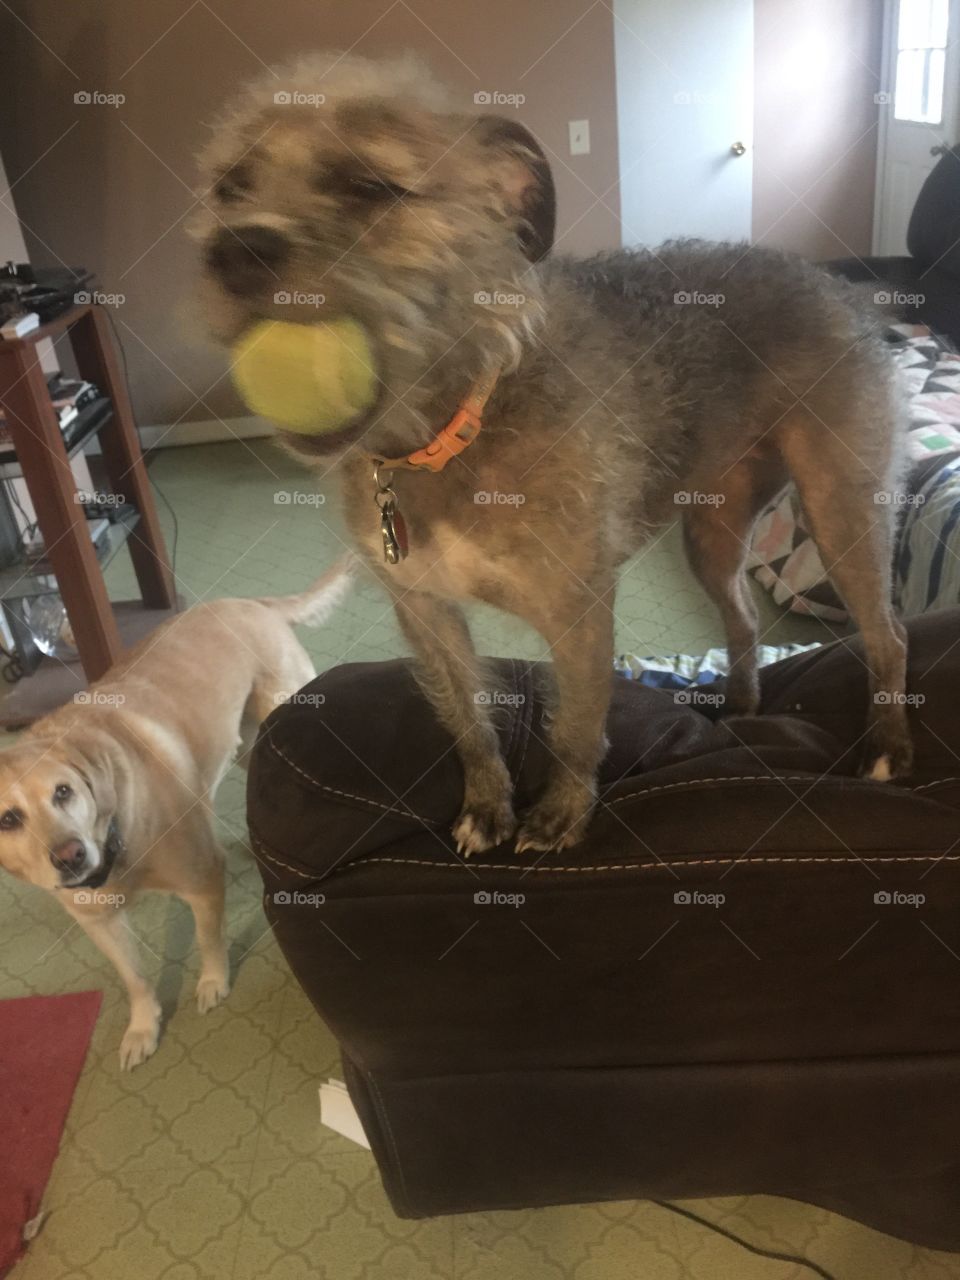 Dogs with ball tennis